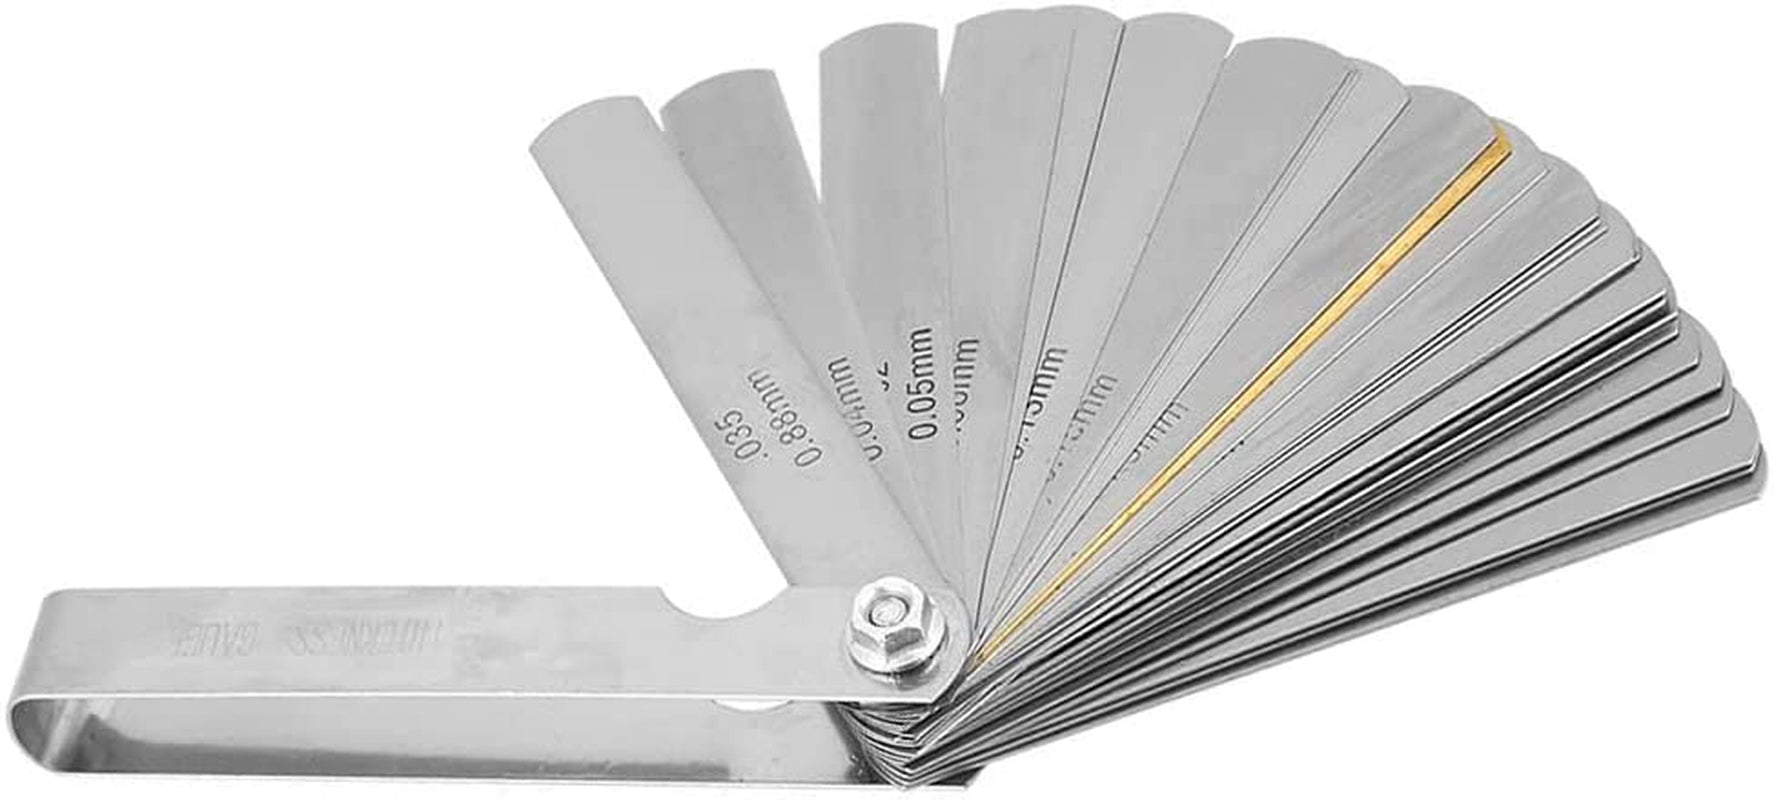 secretgreen.com.au, Manganese Steel Feeler Gauge, Metric/Imperial for Measuring Gap Width and Thickness (0.04-0.88 Mm, 32 Blades)